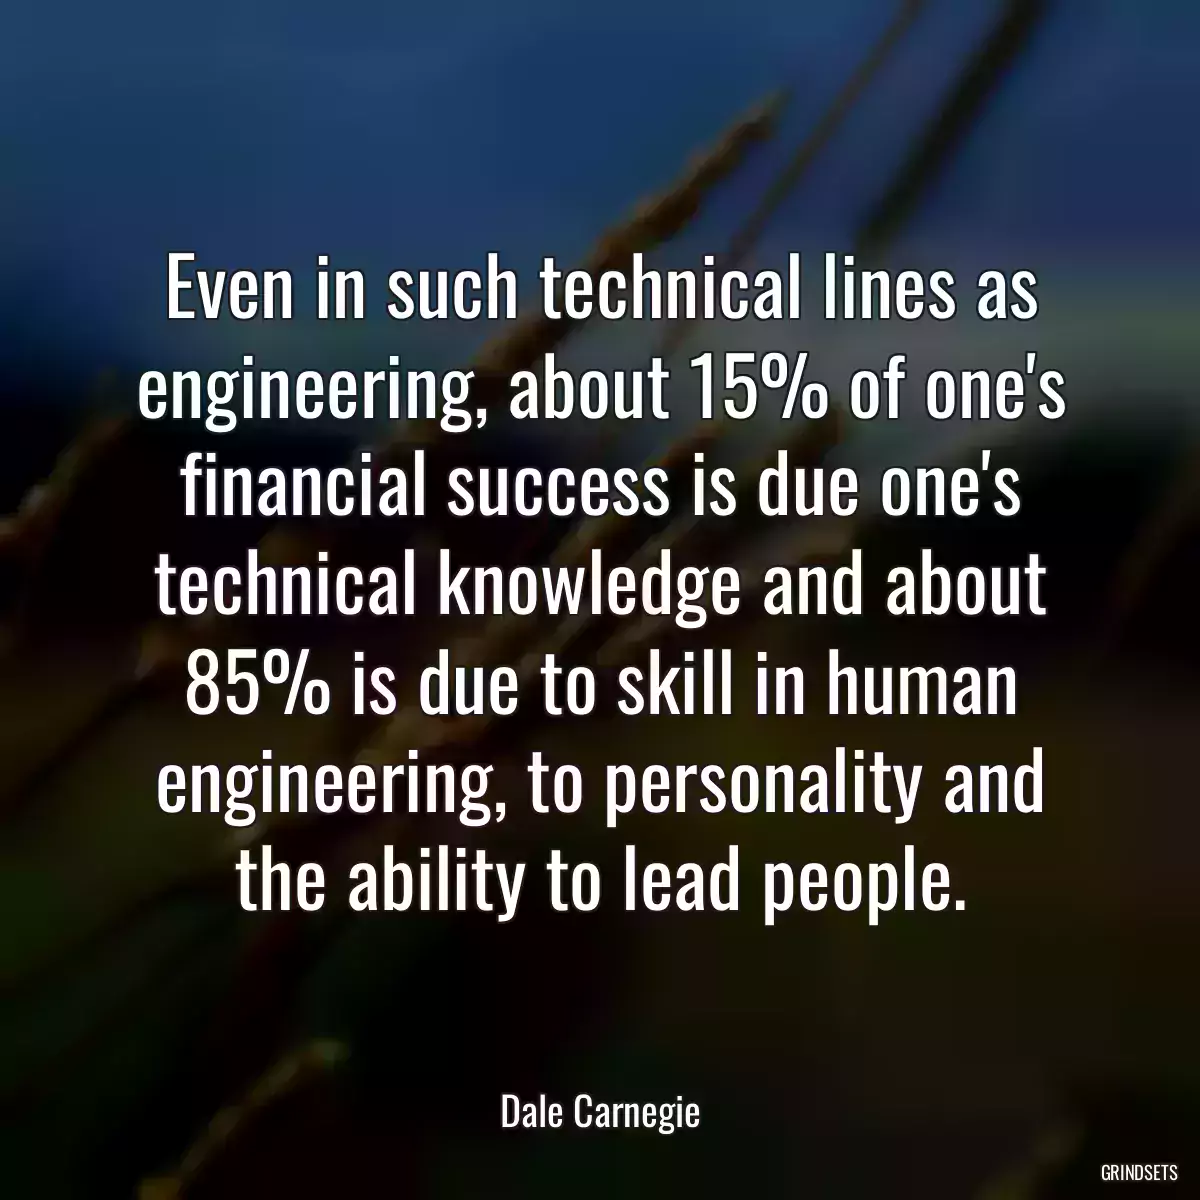 Even in such technical lines as engineering, about 15% of one\'s financial success is due one\'s technical knowledge and about 85% is due to skill in human engineering, to personality and the ability to lead people.